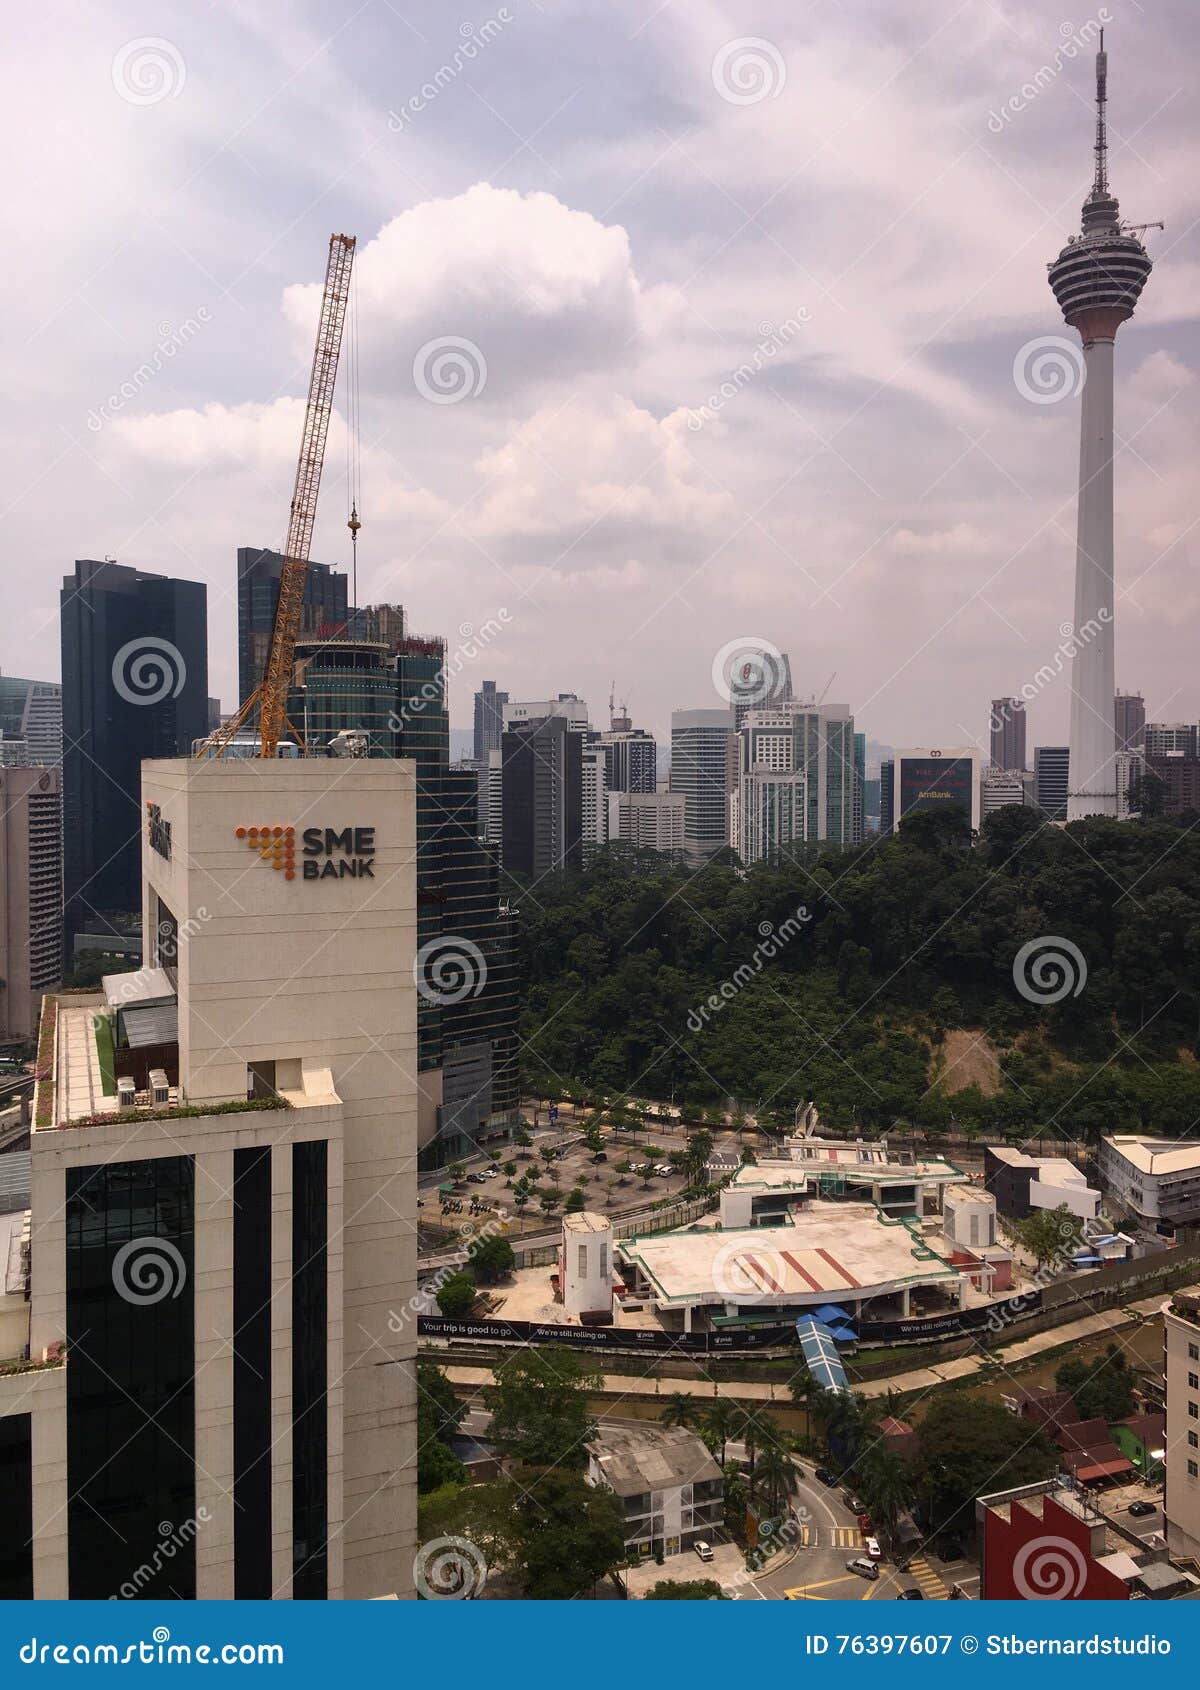 SME Bank Tall Building Under Construction With KL Tower In ...